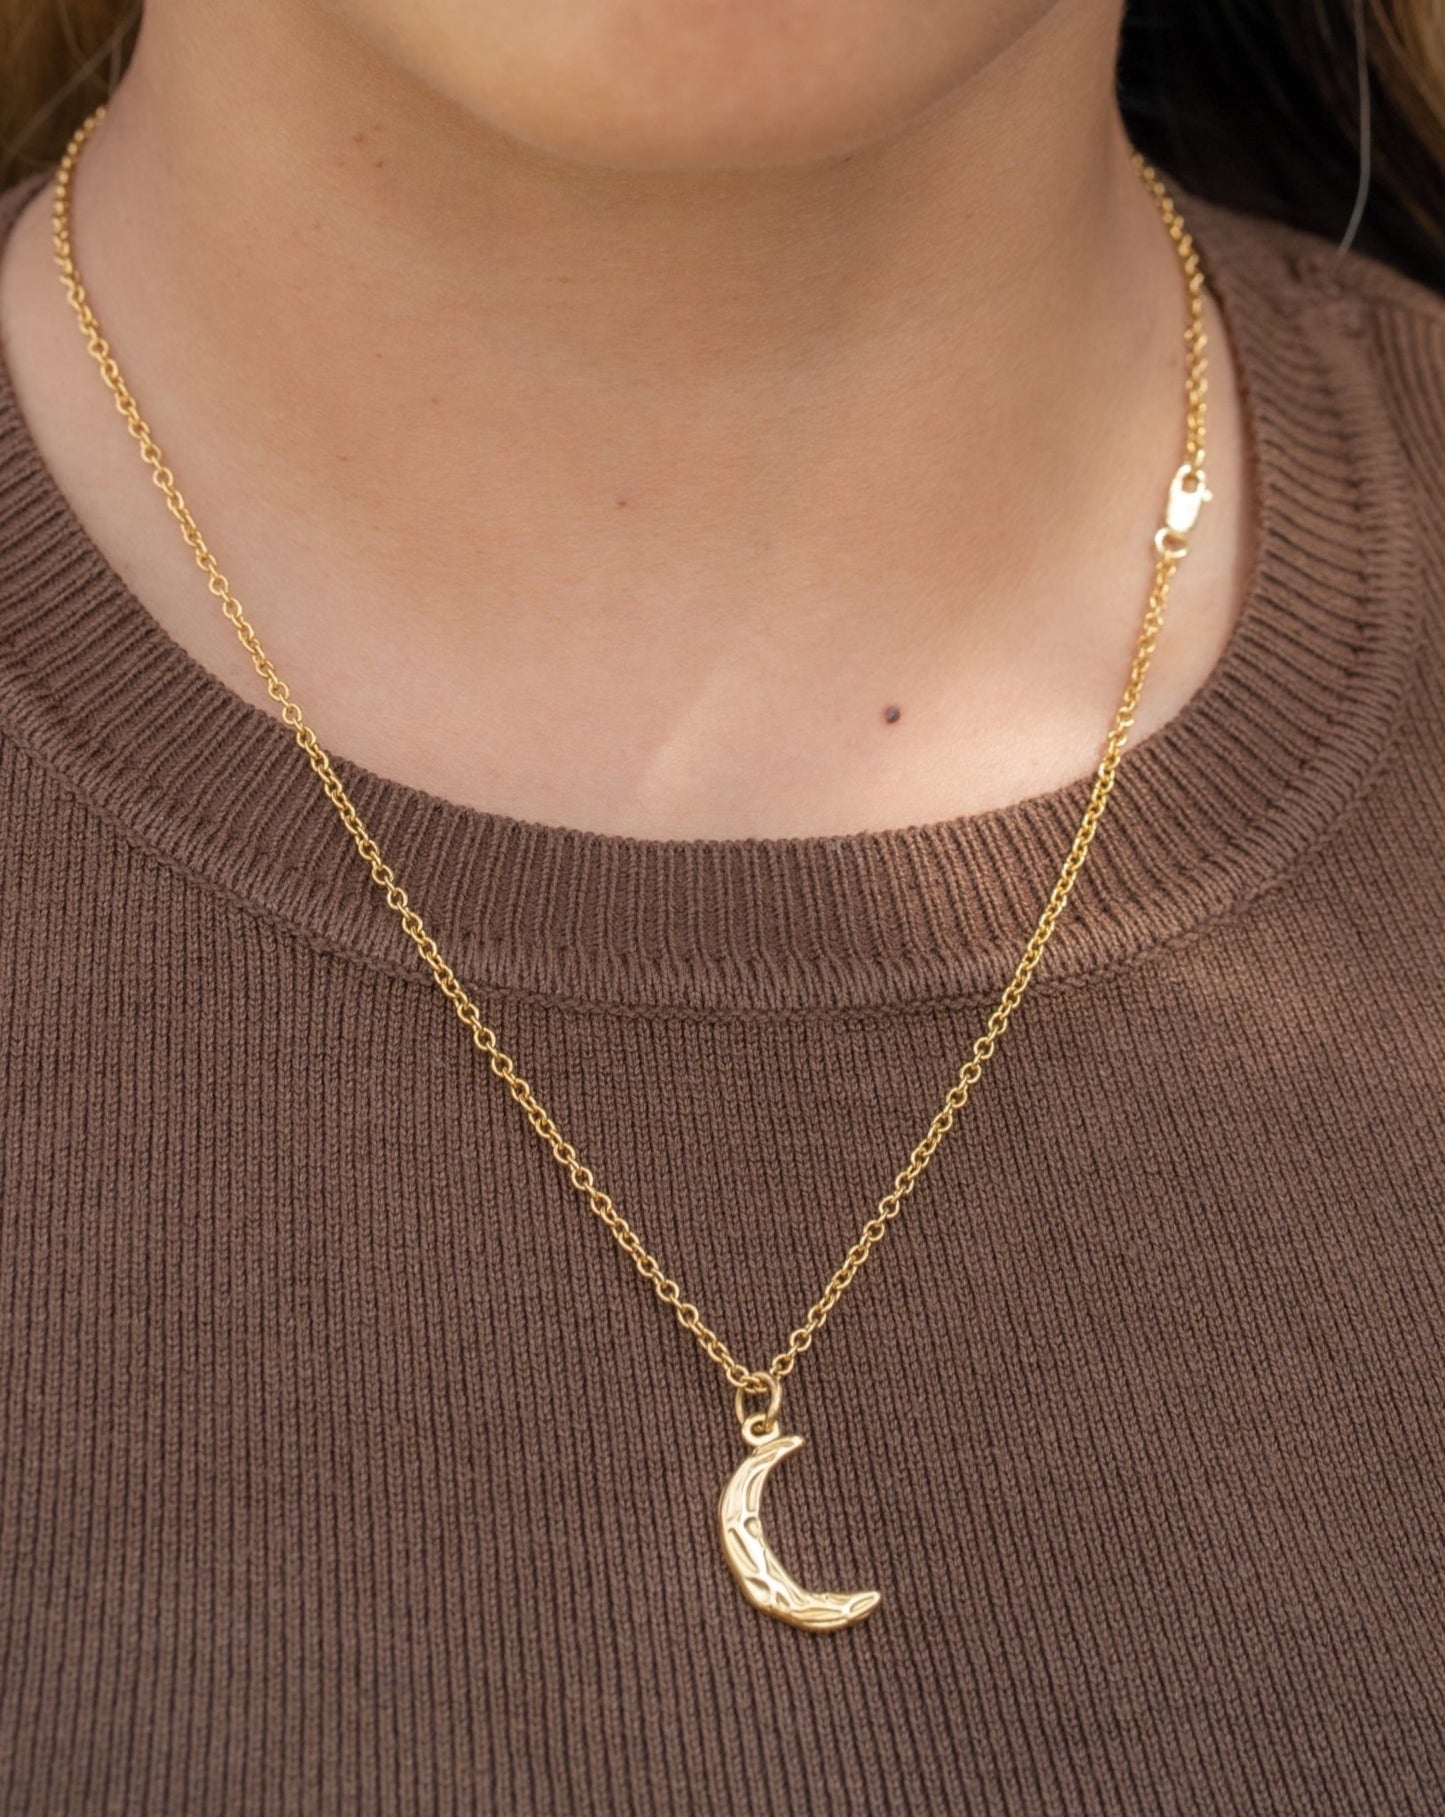 MOON NECKLACE - DE.FINE Collection Jewelry